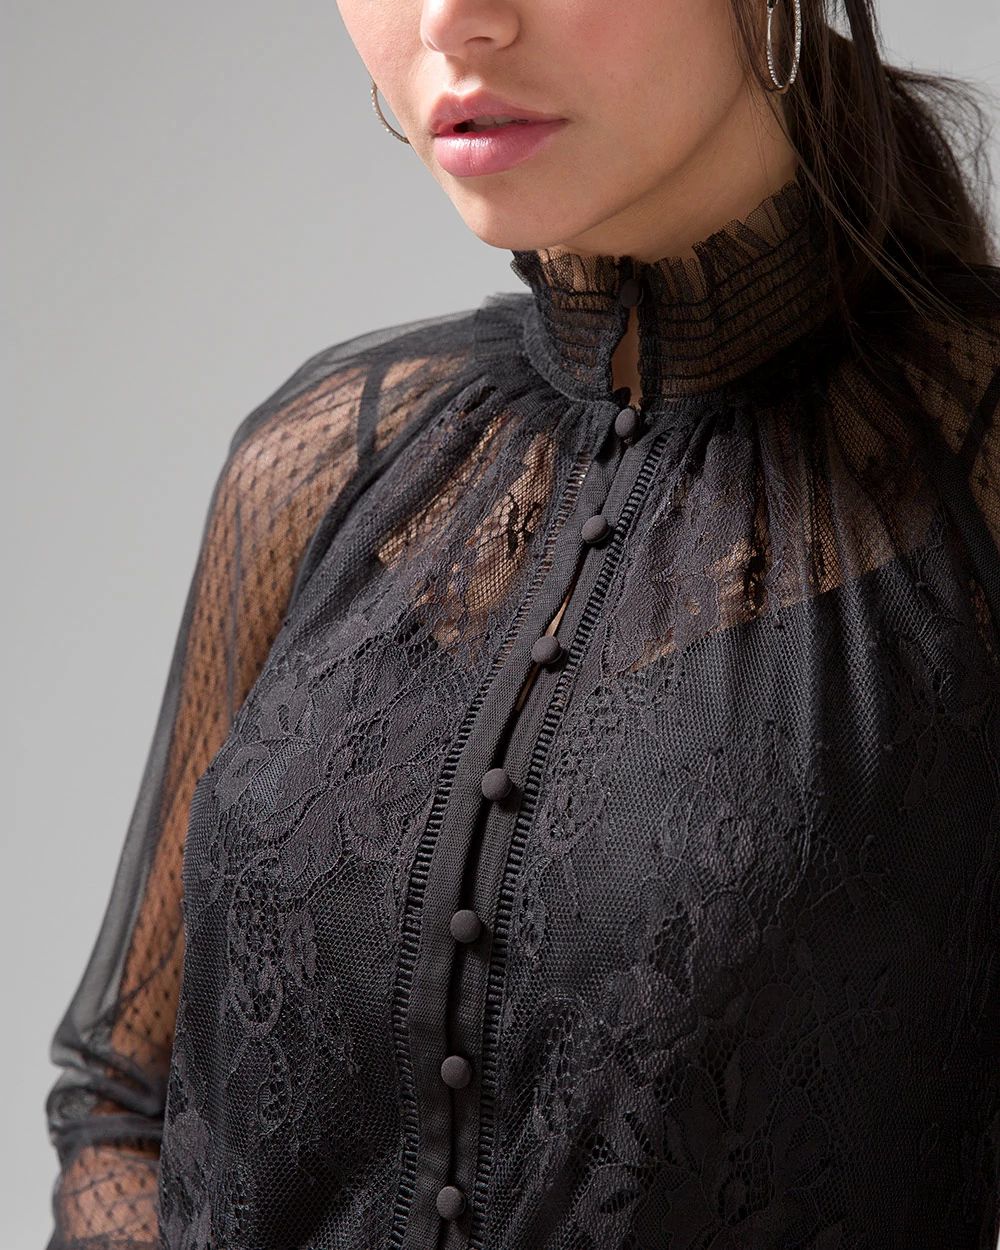 Tulle Mixed Lace Blouse click to view larger image.